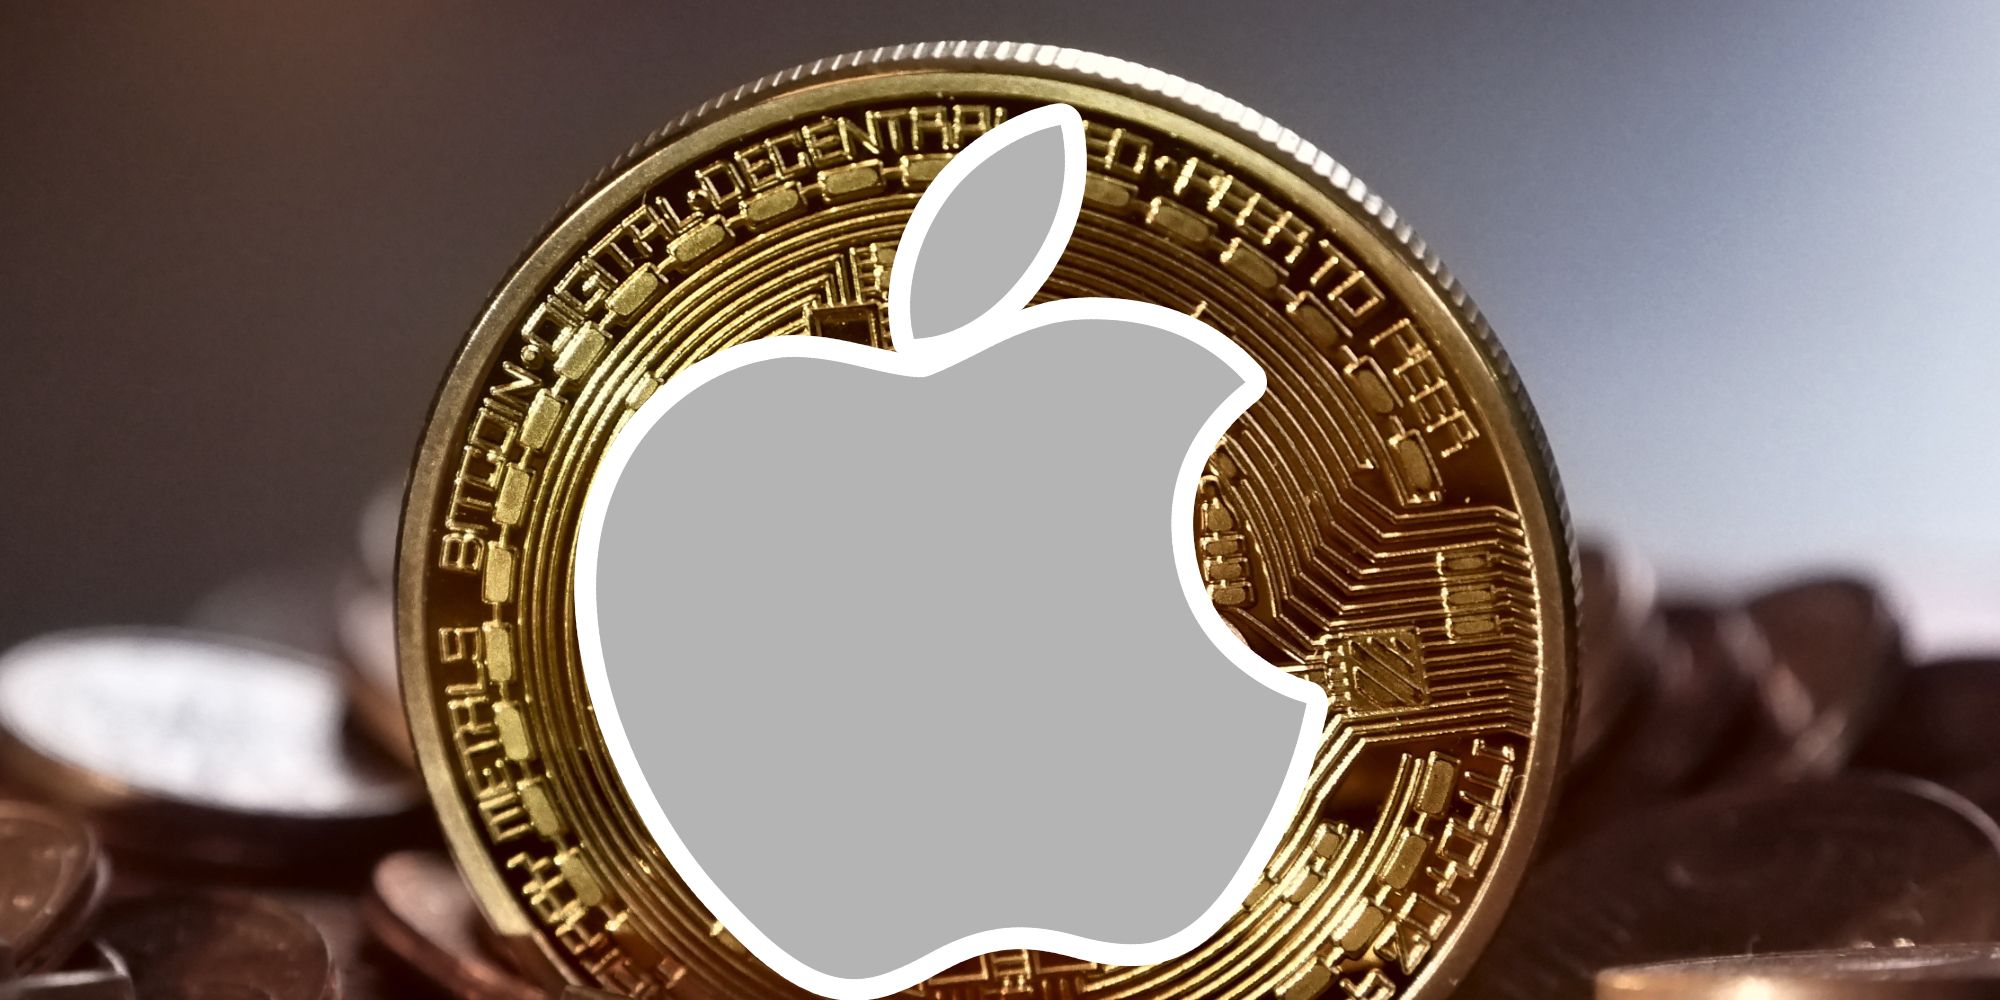 Apple logo on a rendering of cryptocurrency